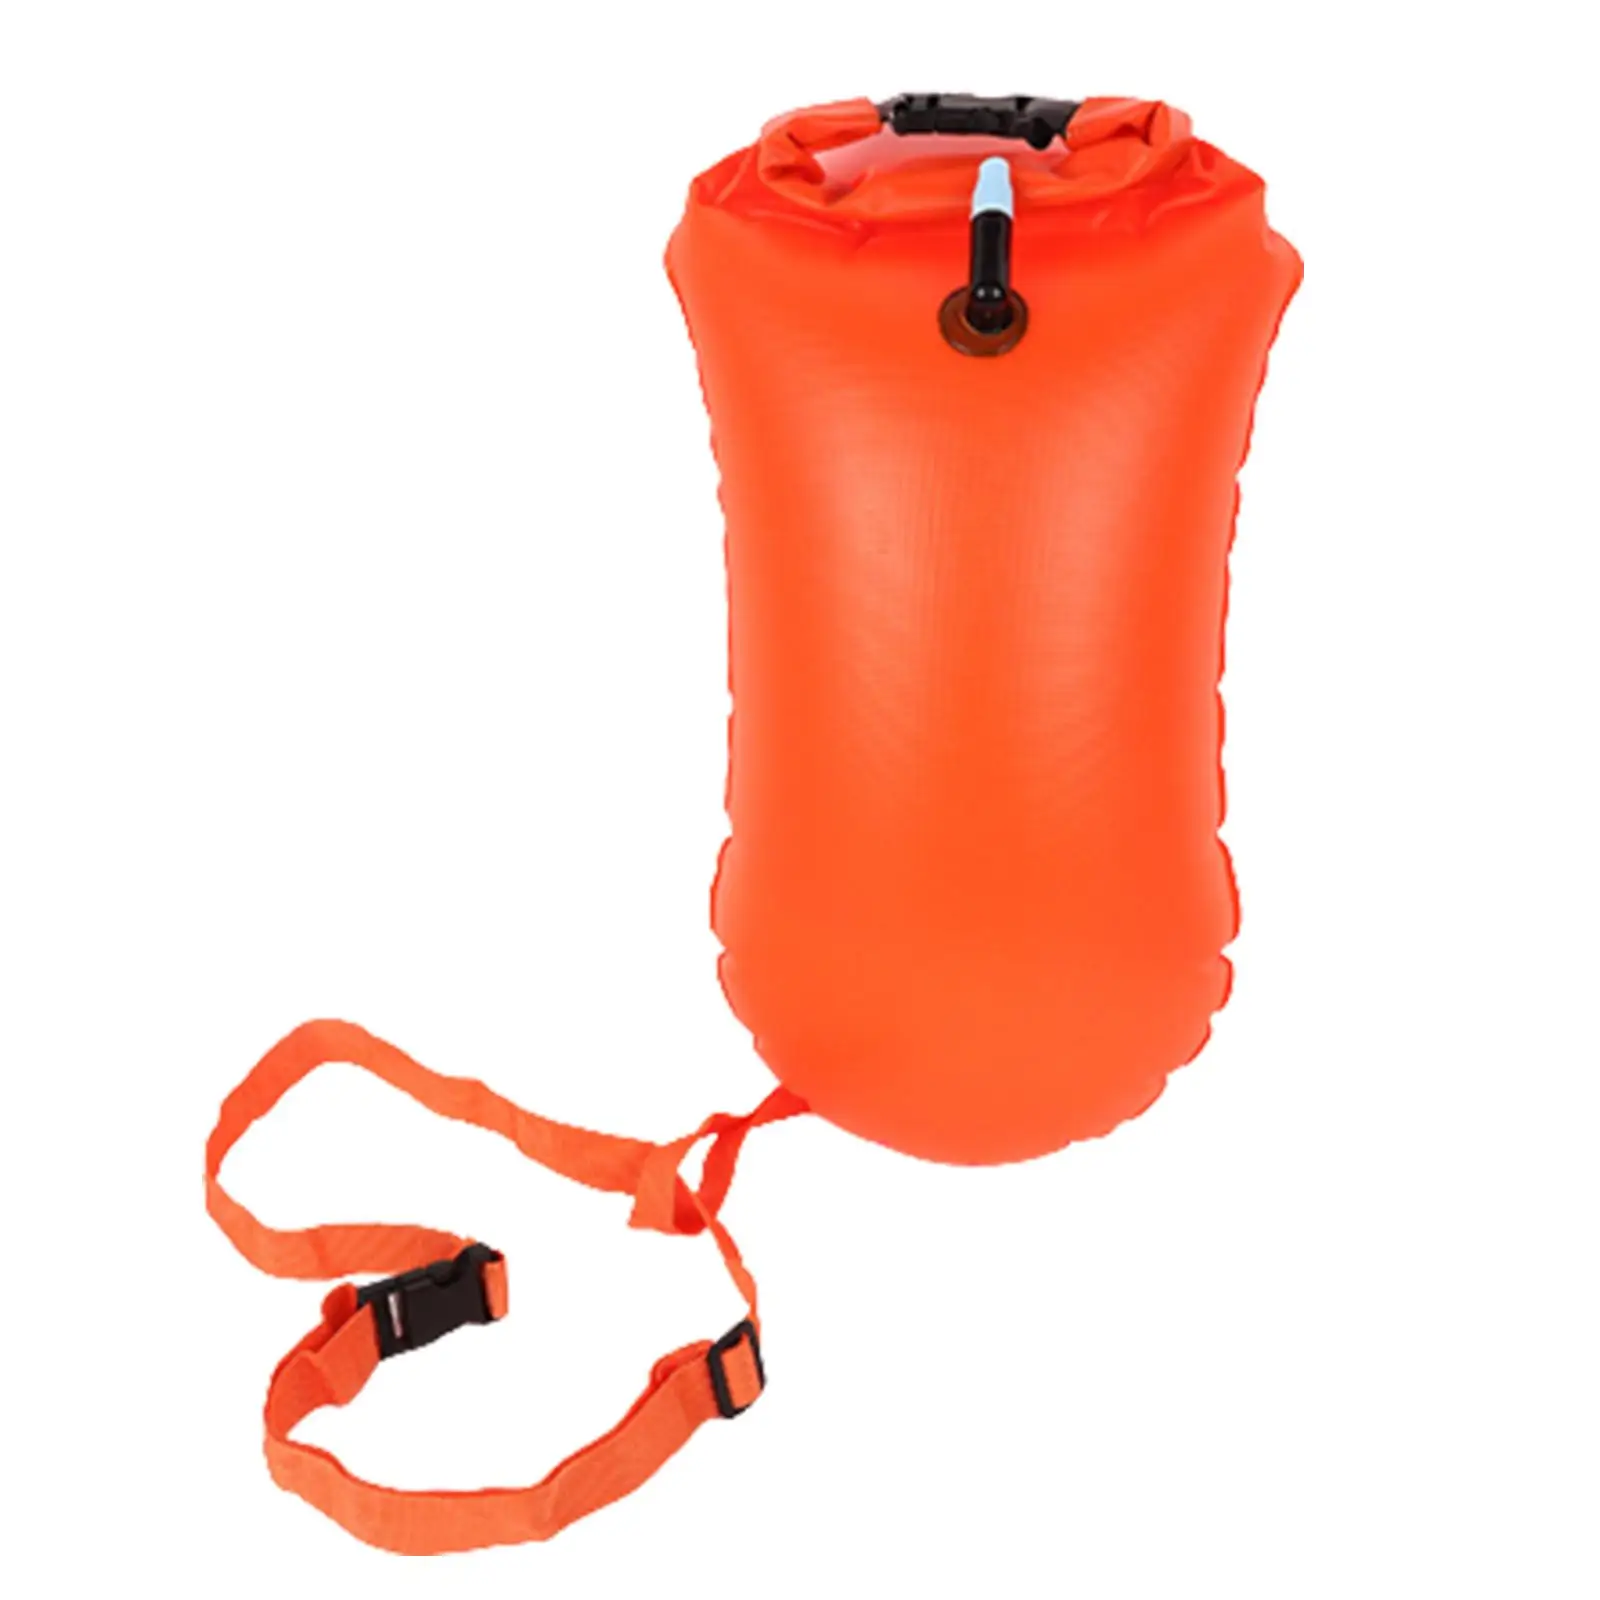 Safety Swim Buoy Float Waterproof Storage Bag for Canoe Hiking Camping